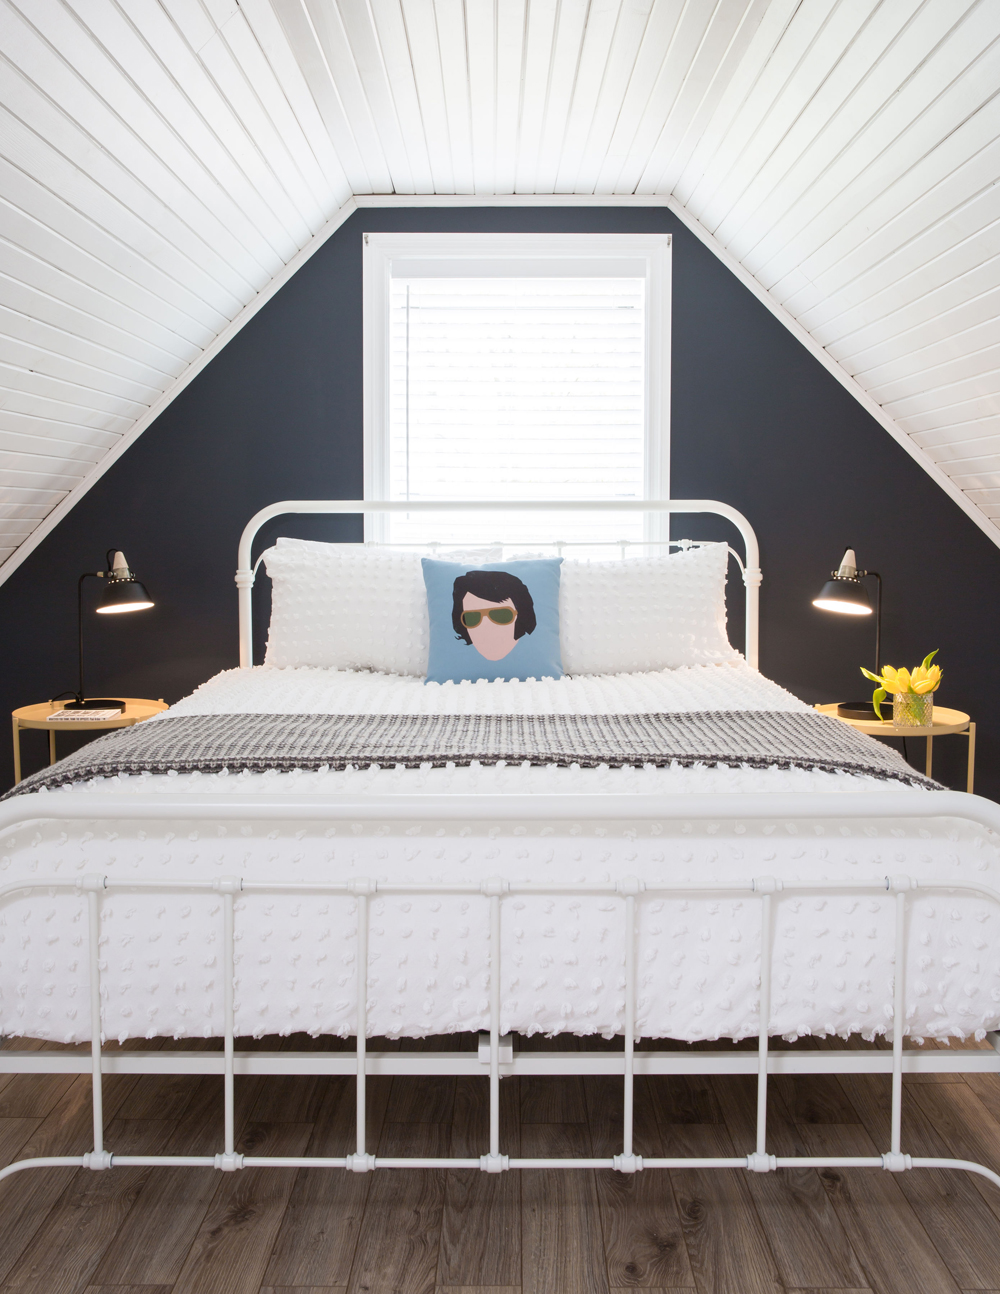 A small attic bedroom with a sloping roof and Elvis-themed pillows